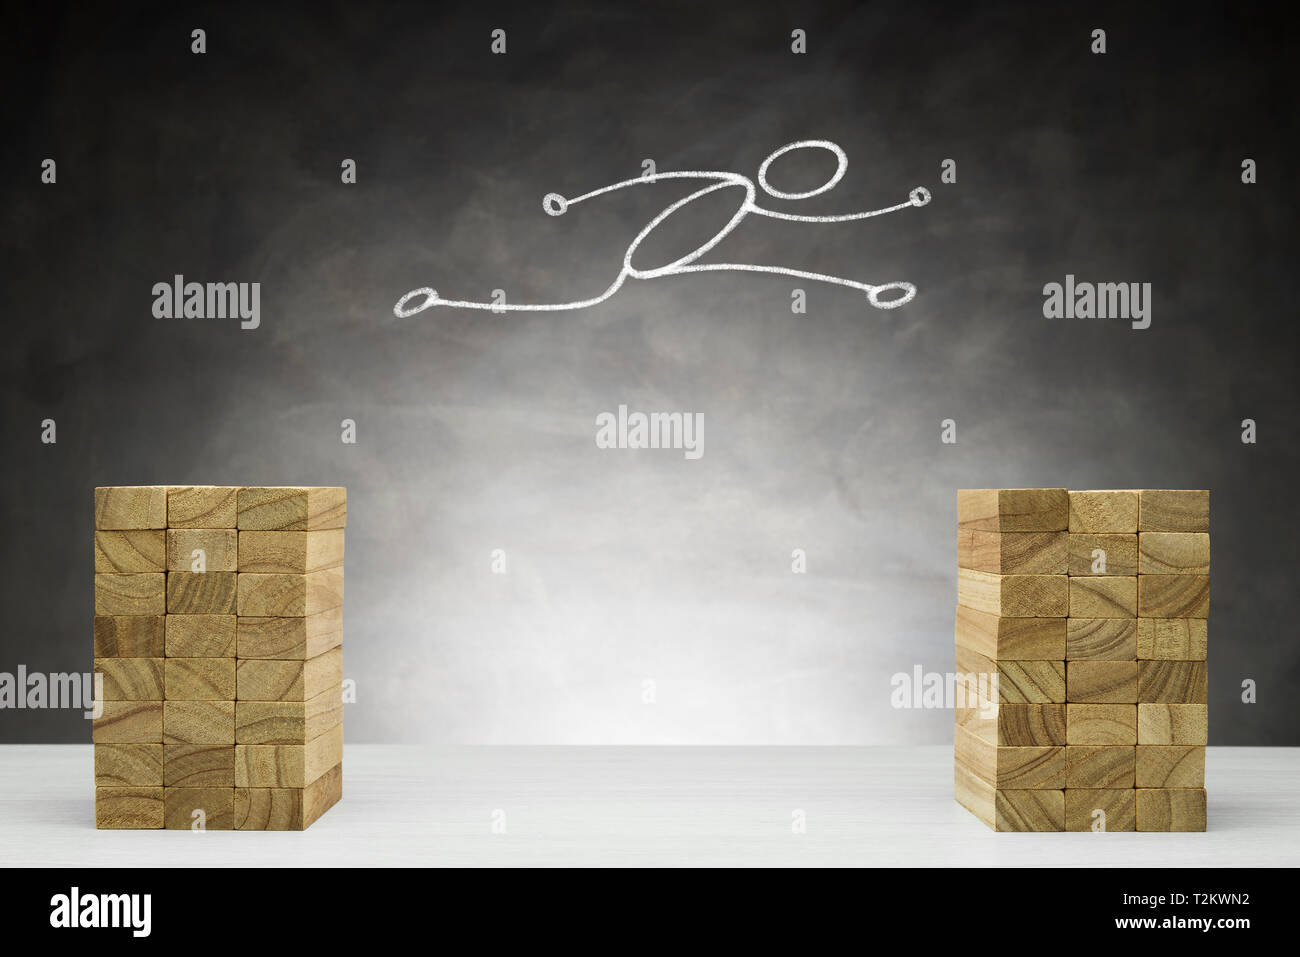 Rise and improvement concept. Human shape jumps between two blocks. Stock Photo